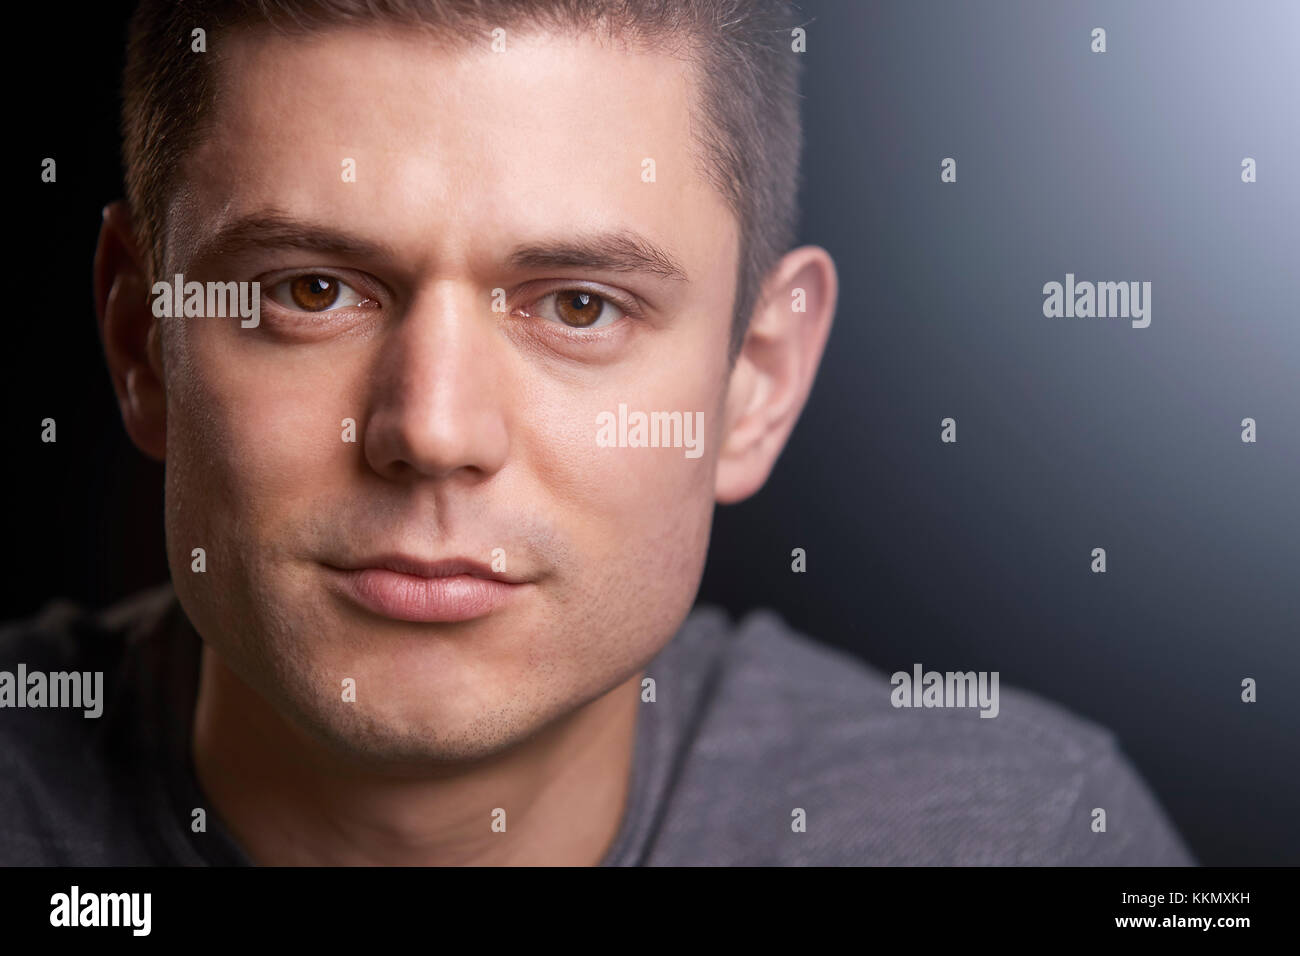 Close up portrait of a young white man looking to camera Stock Photo